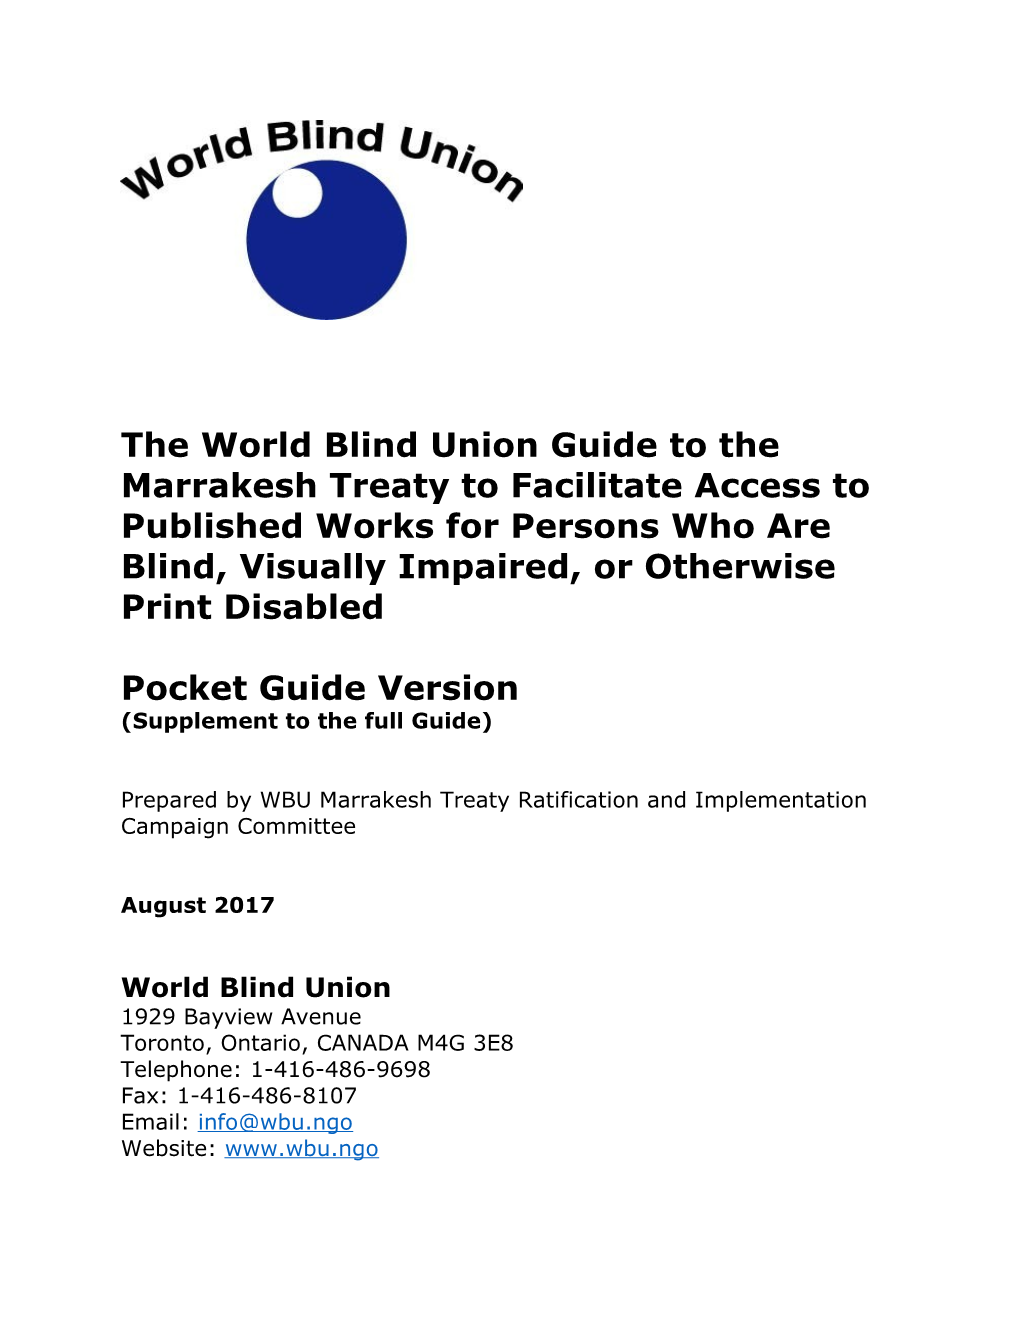 The World Blind Union Guide to The